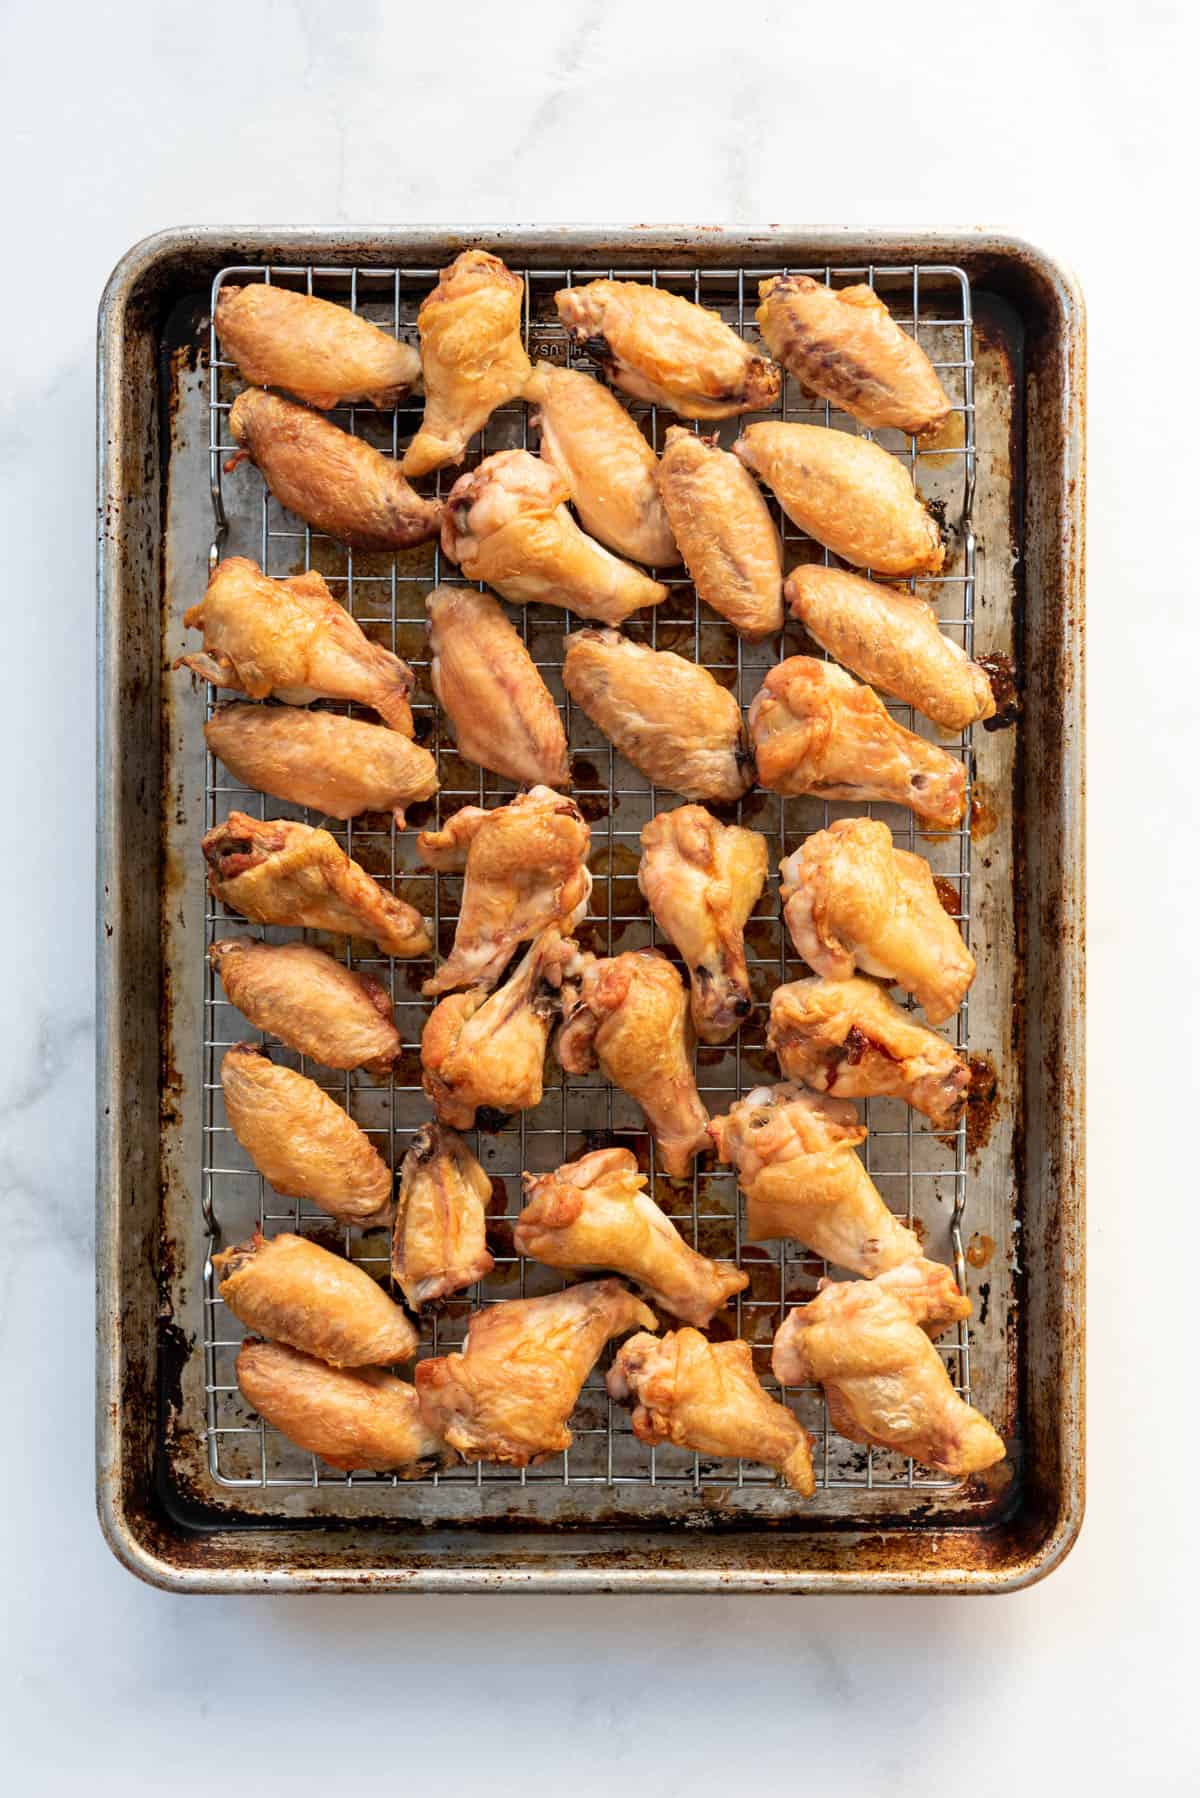 Crispy baked chicken wings on a wire rack set over a baking sheet.